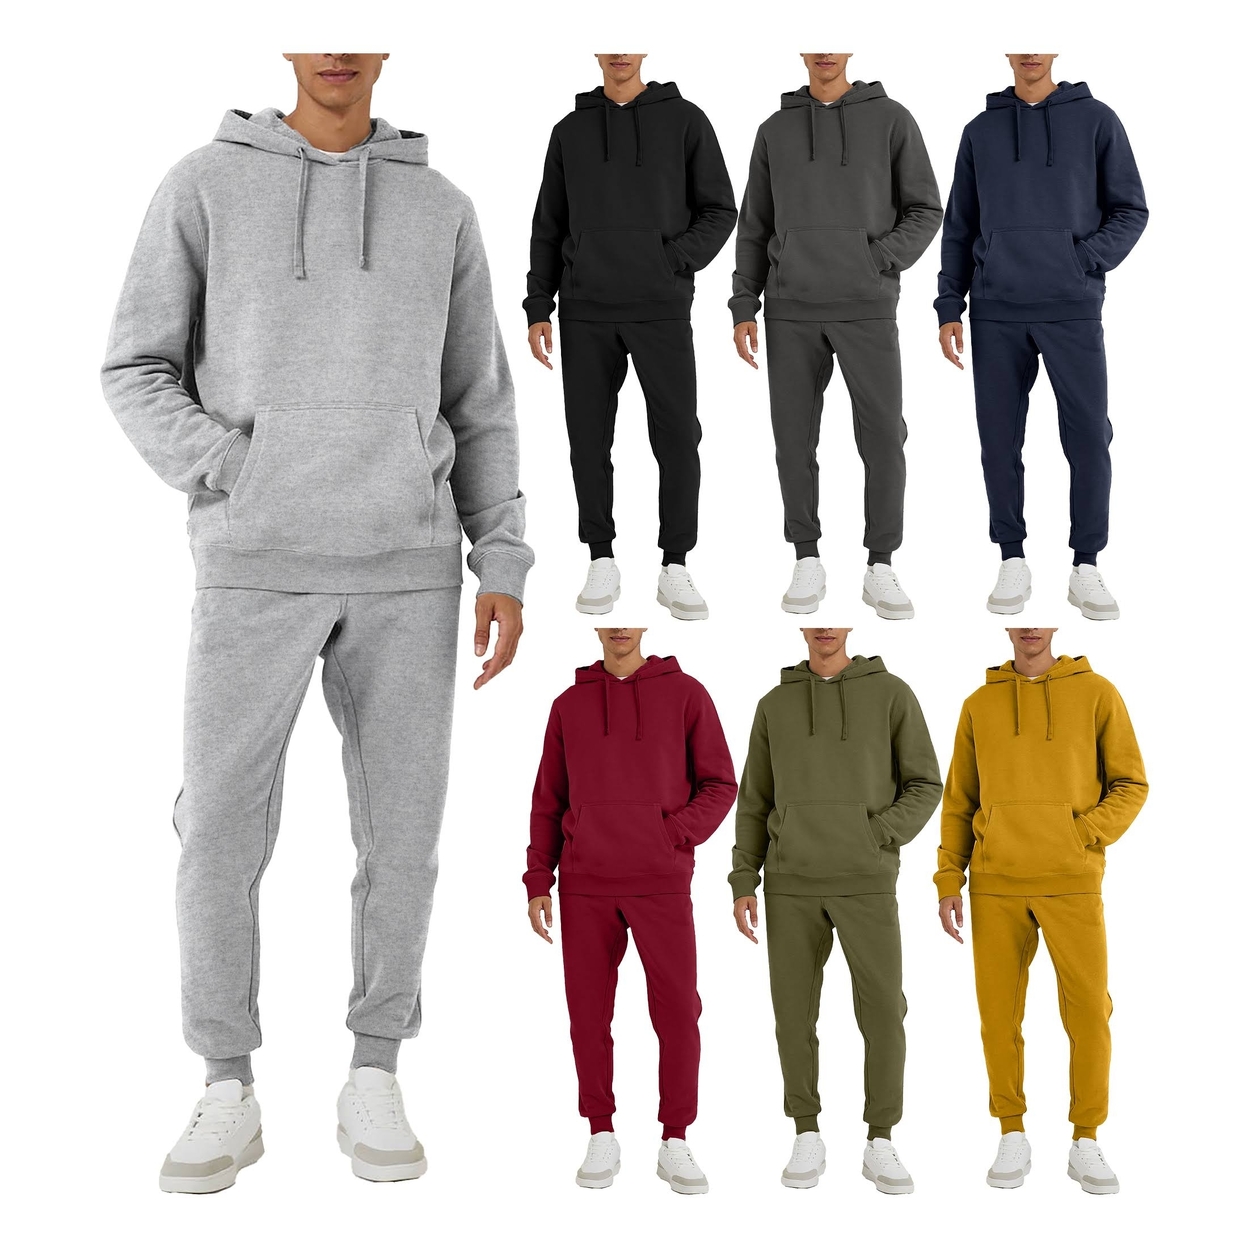 Multi-Pack: Men's Big & Tall Athletic Active Jogging Winter Warm Fleece Lined Pullover Tracksuit Set - Grey, 2-pack, Small